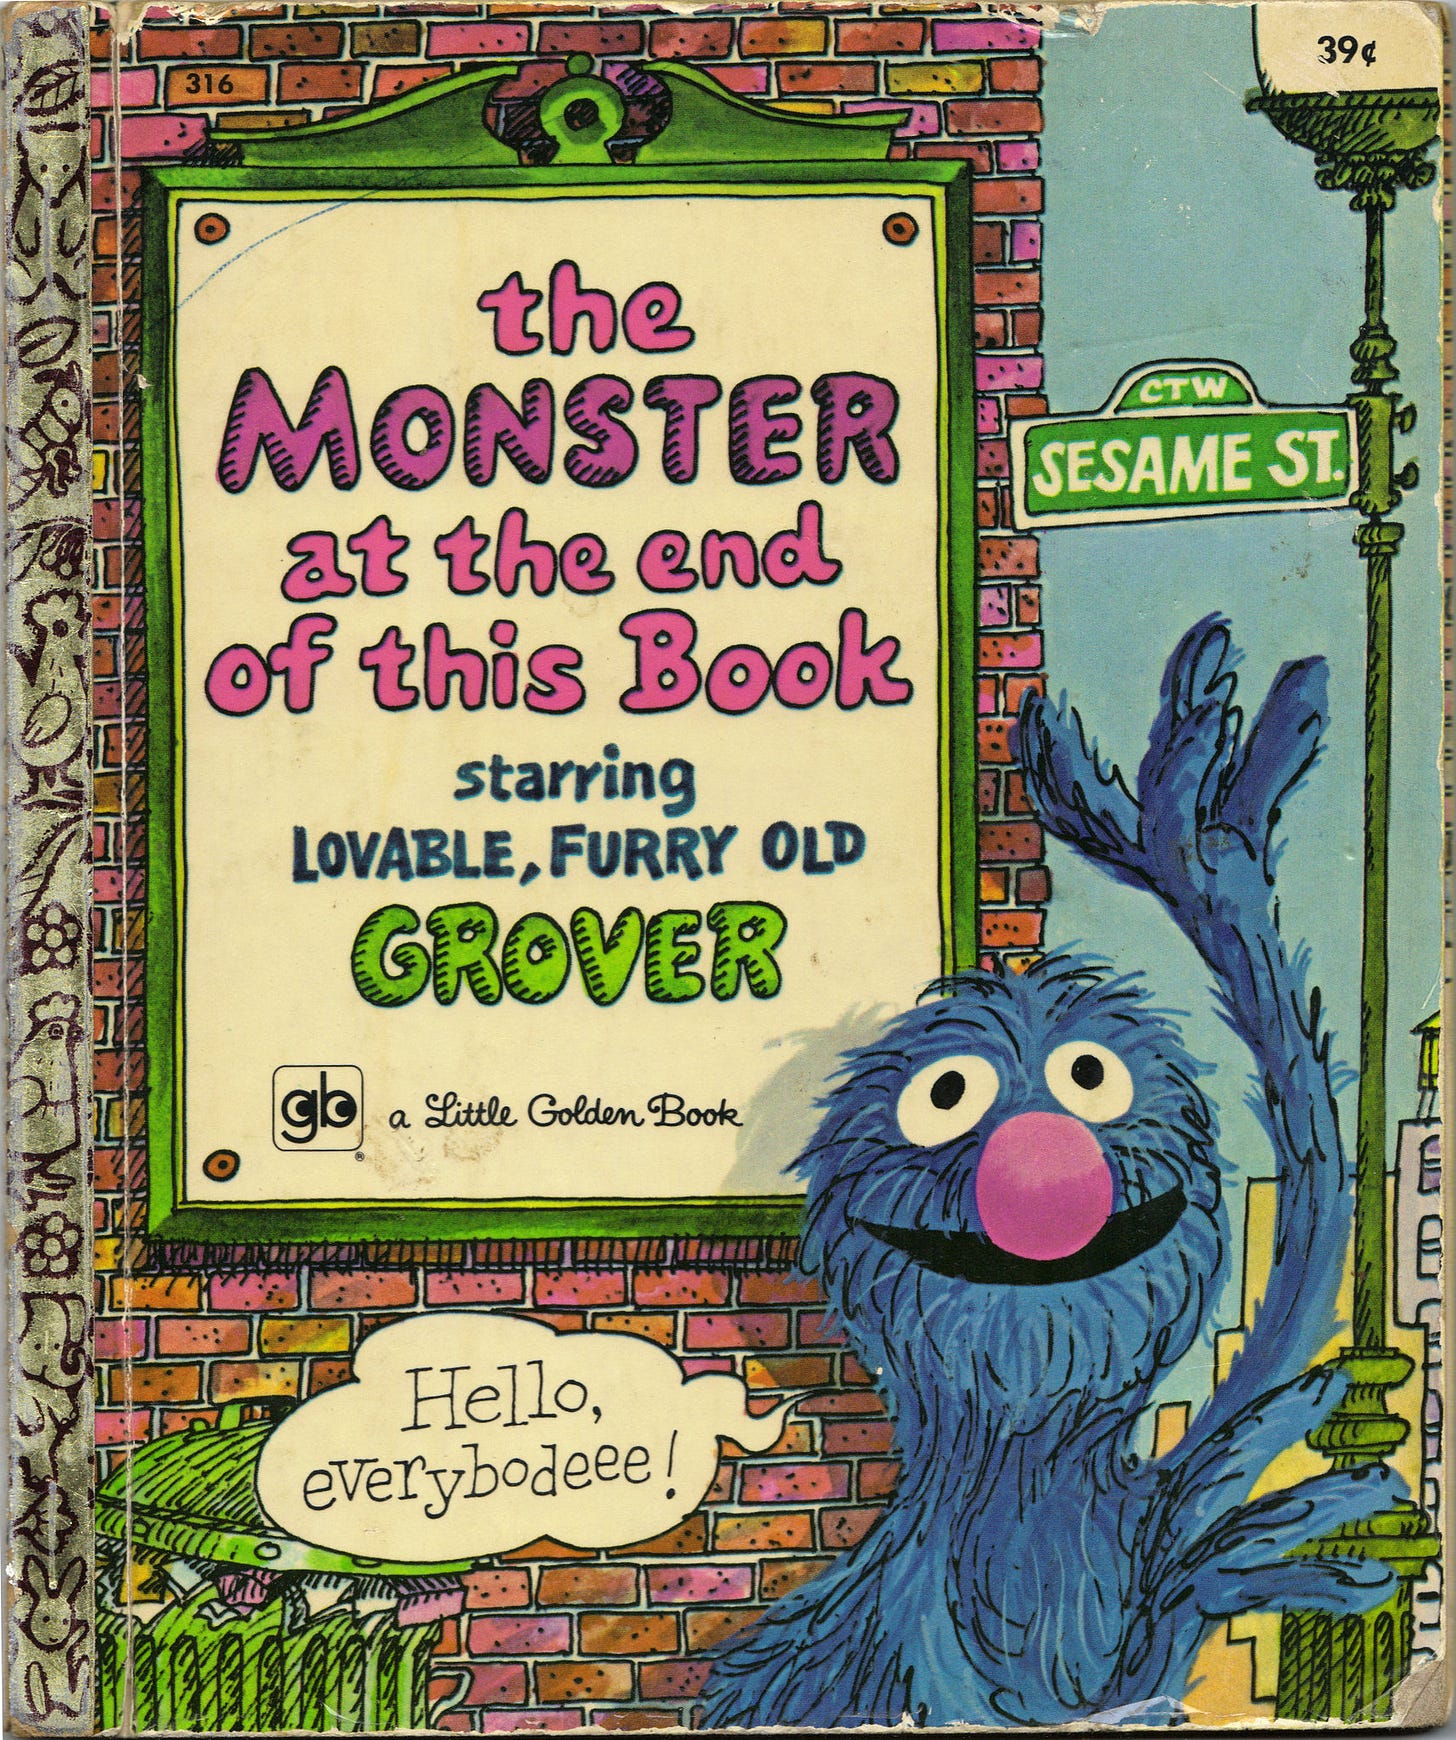 The Monster At The End Of This Book starring Grover from Sesame Street.